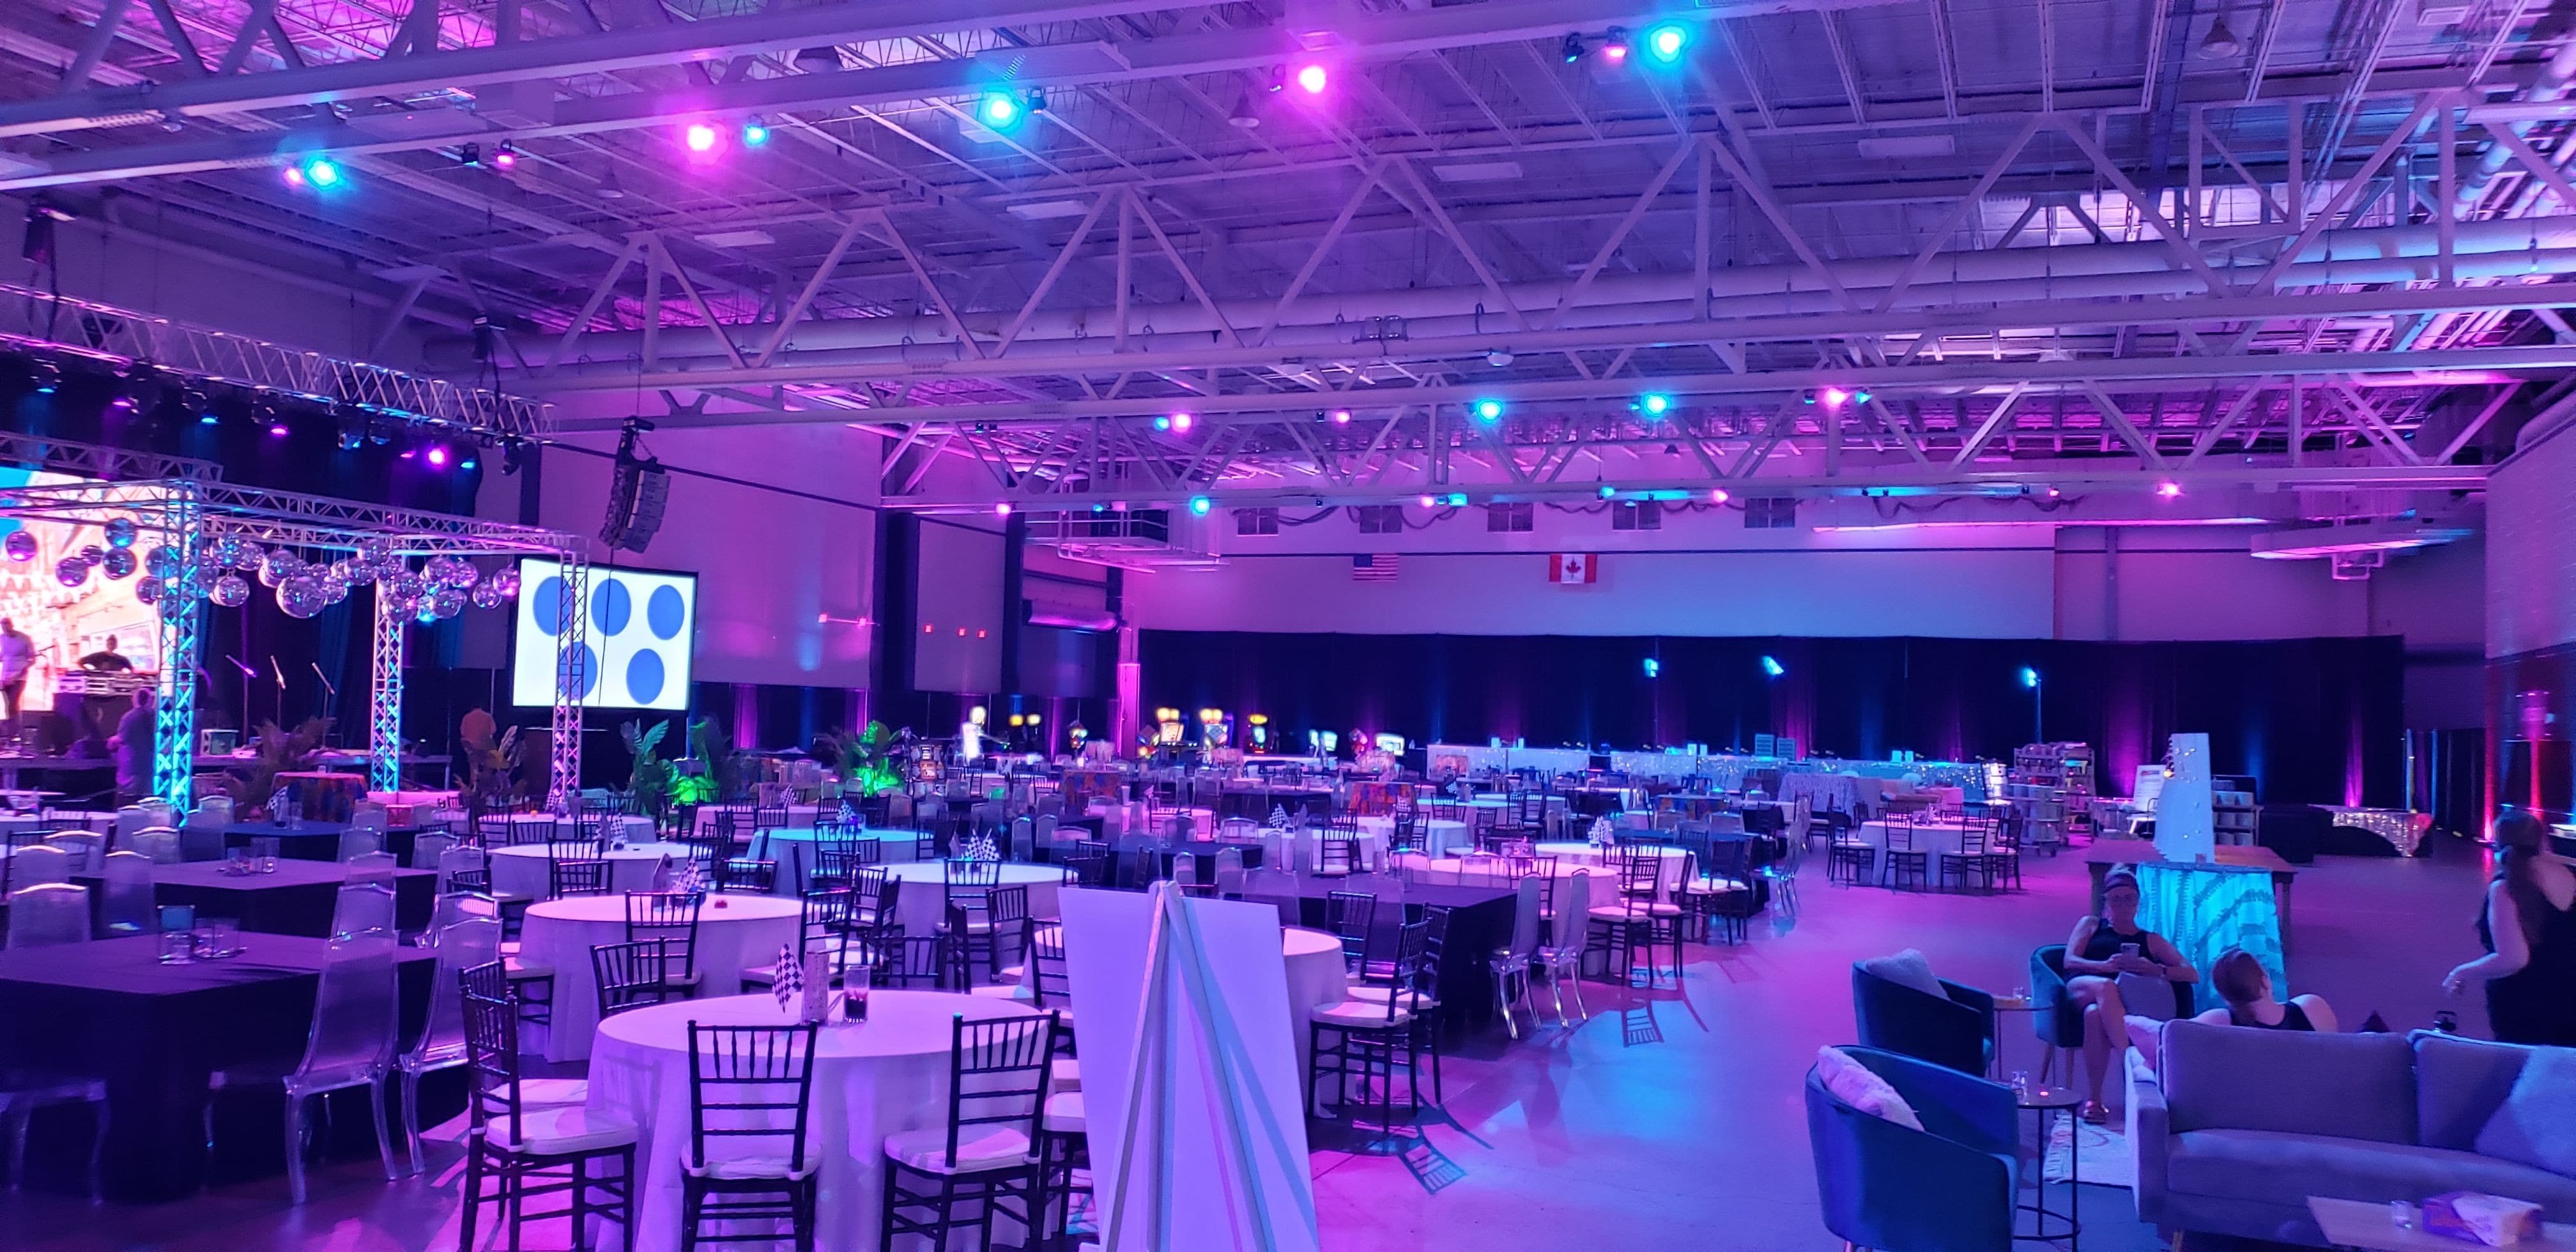 Event Lighting in pioneer Hall by Duluth Event Lighting.teal and magenta  up lighting, gobos on the walls,chandeliers provided by Duluth Event Lighting.